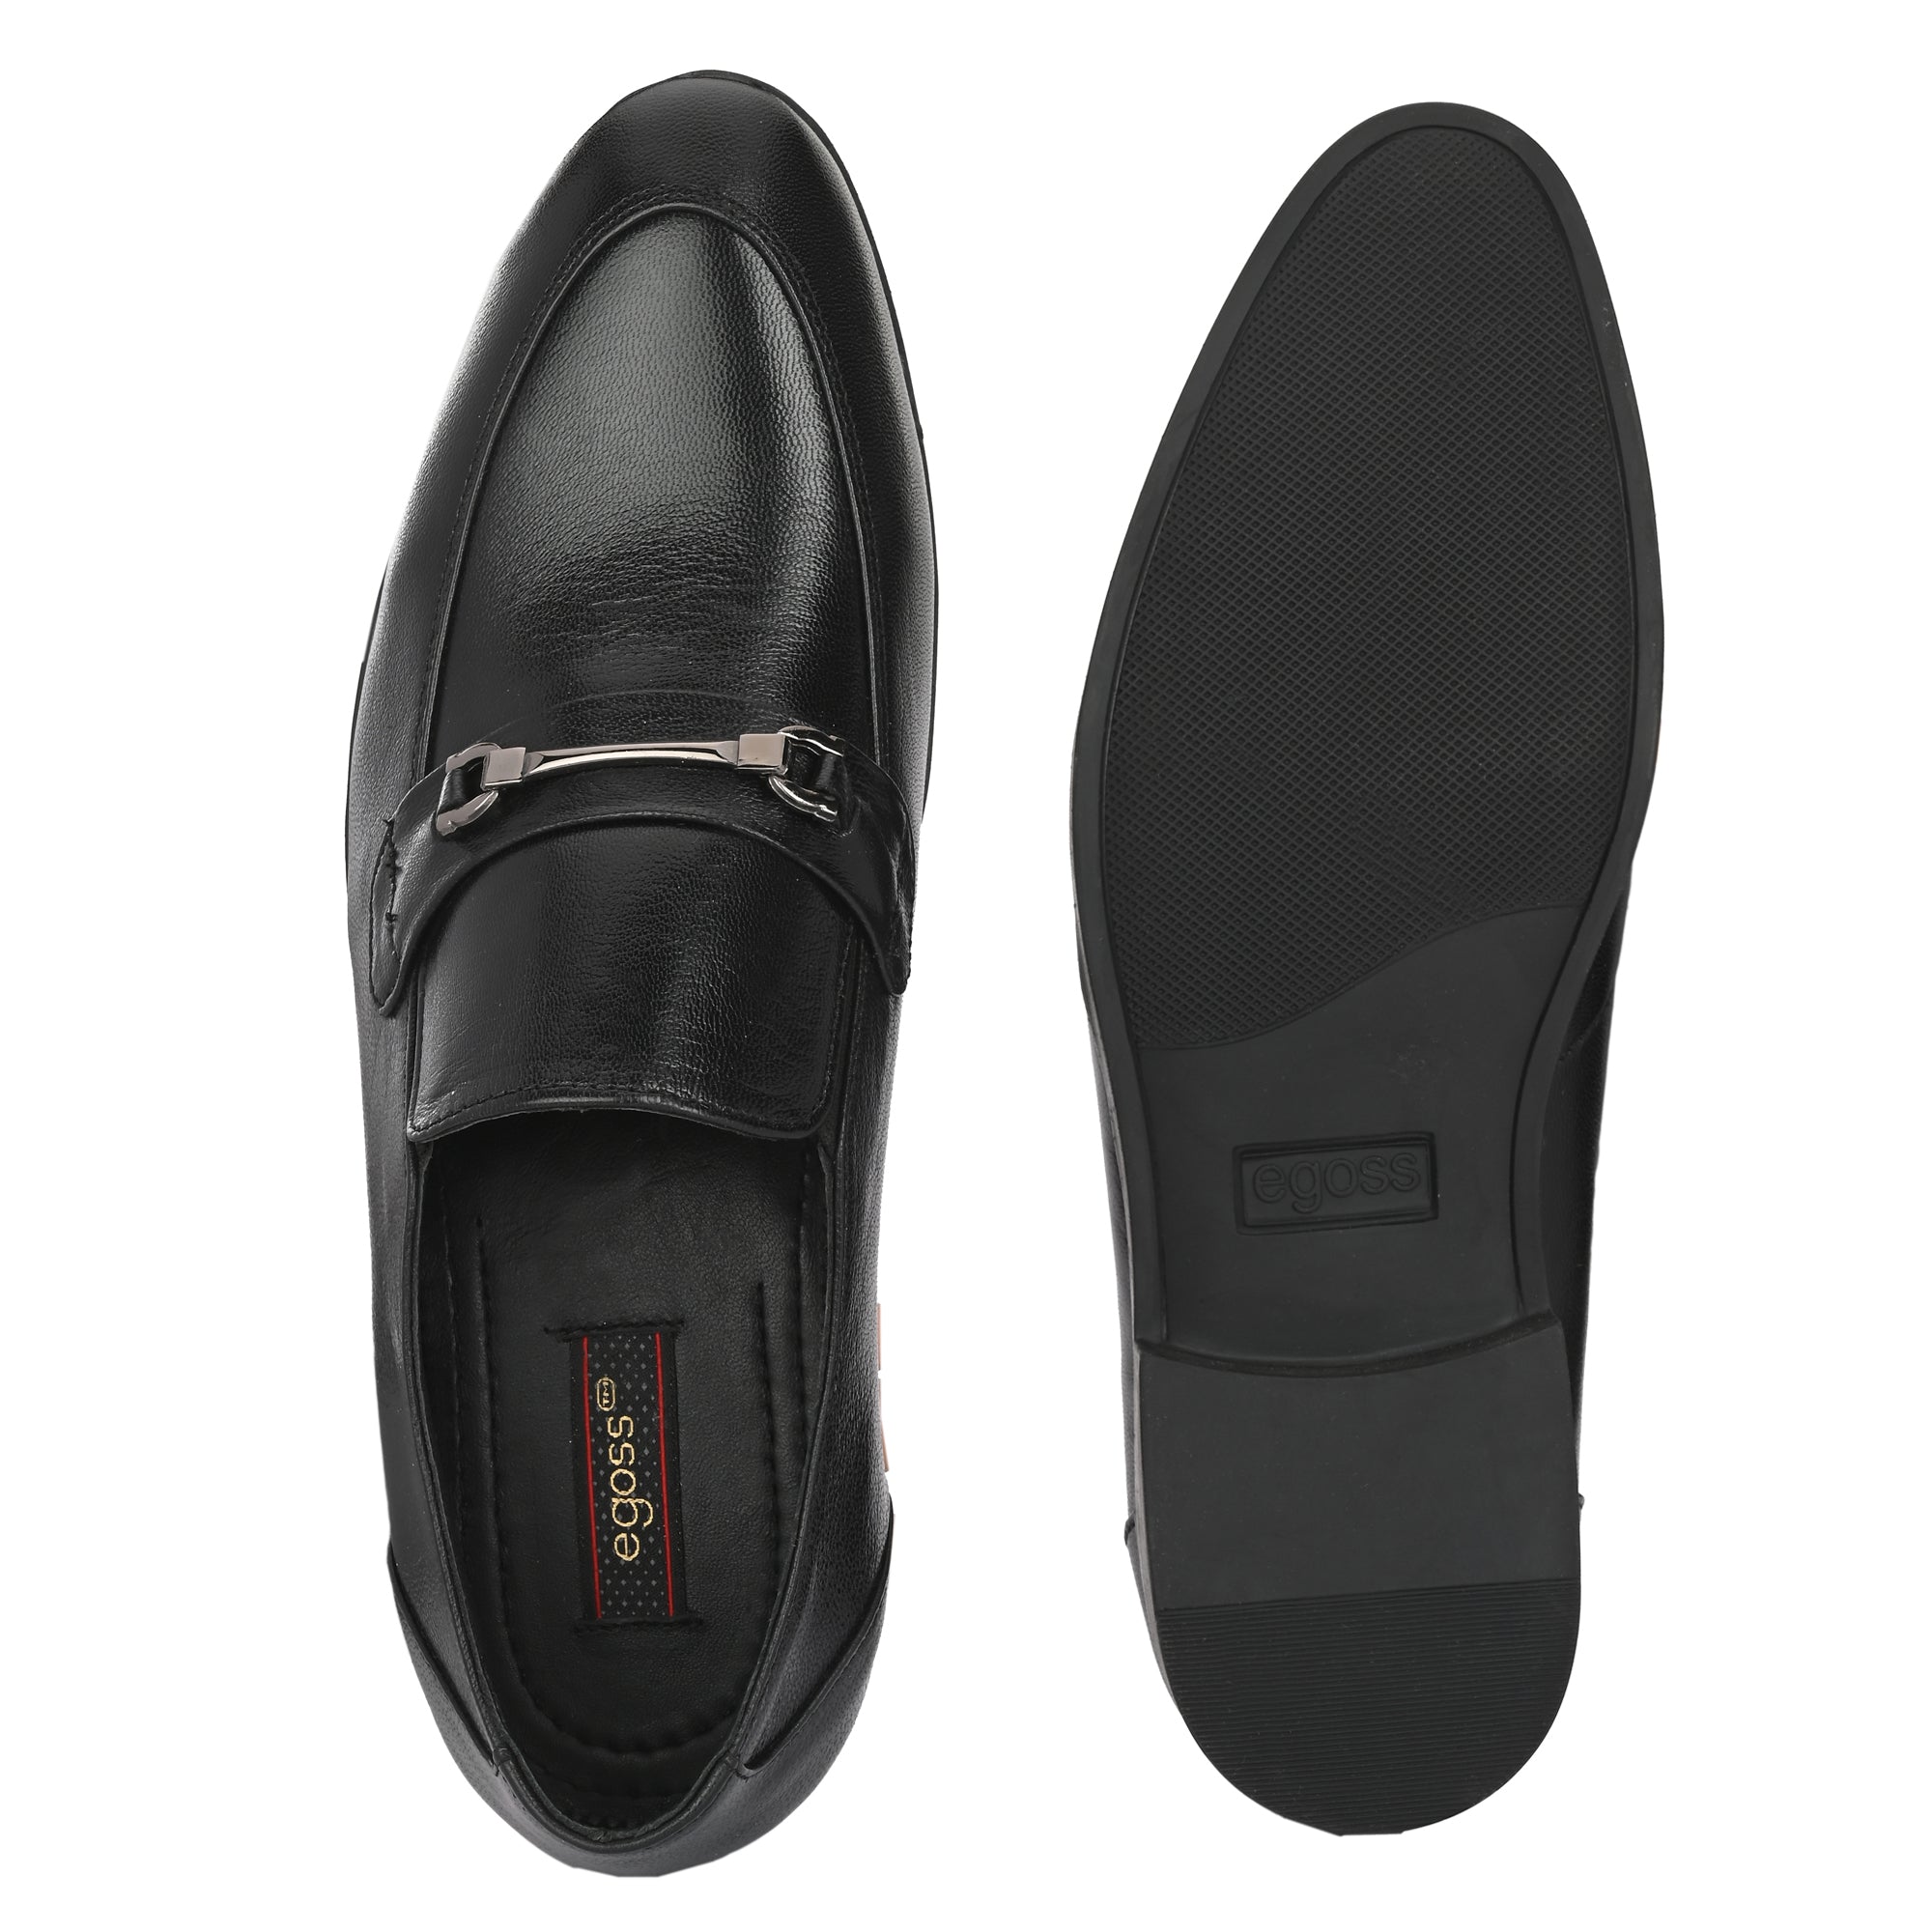 Buckled Formal Shoes For Men by Egoss